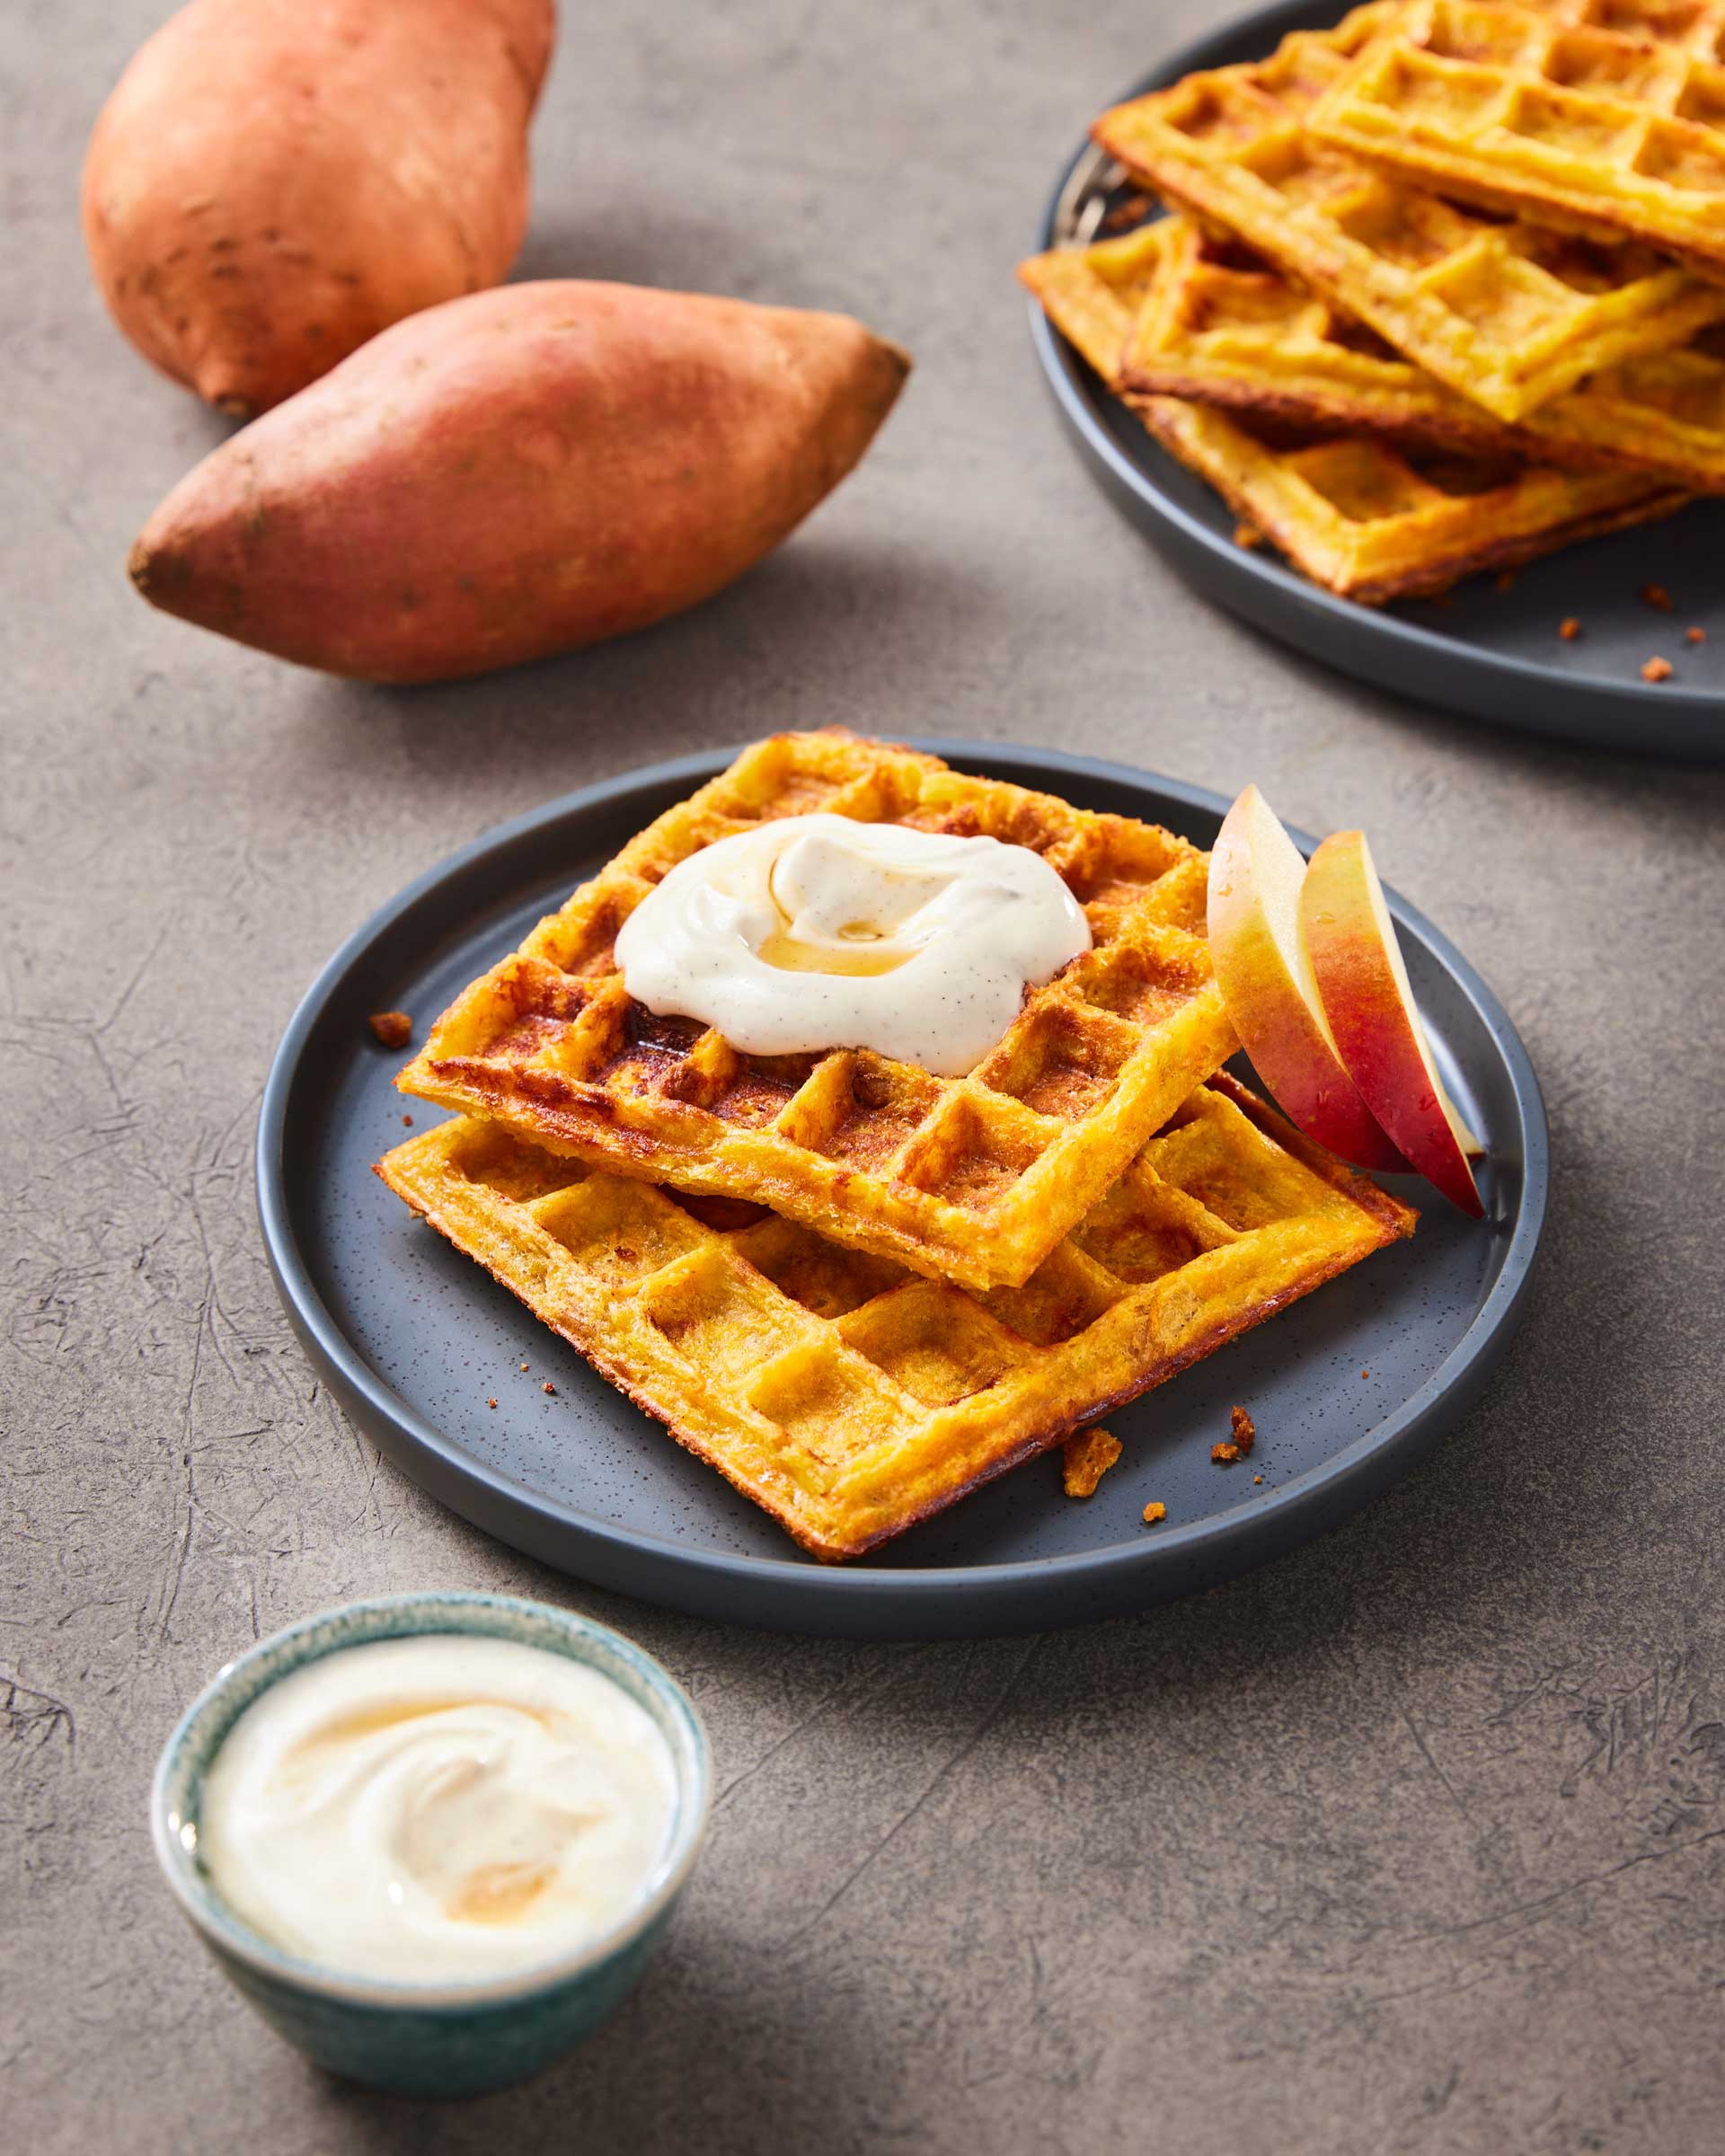 Sweet Potato Waffles with Apples and Walnuts